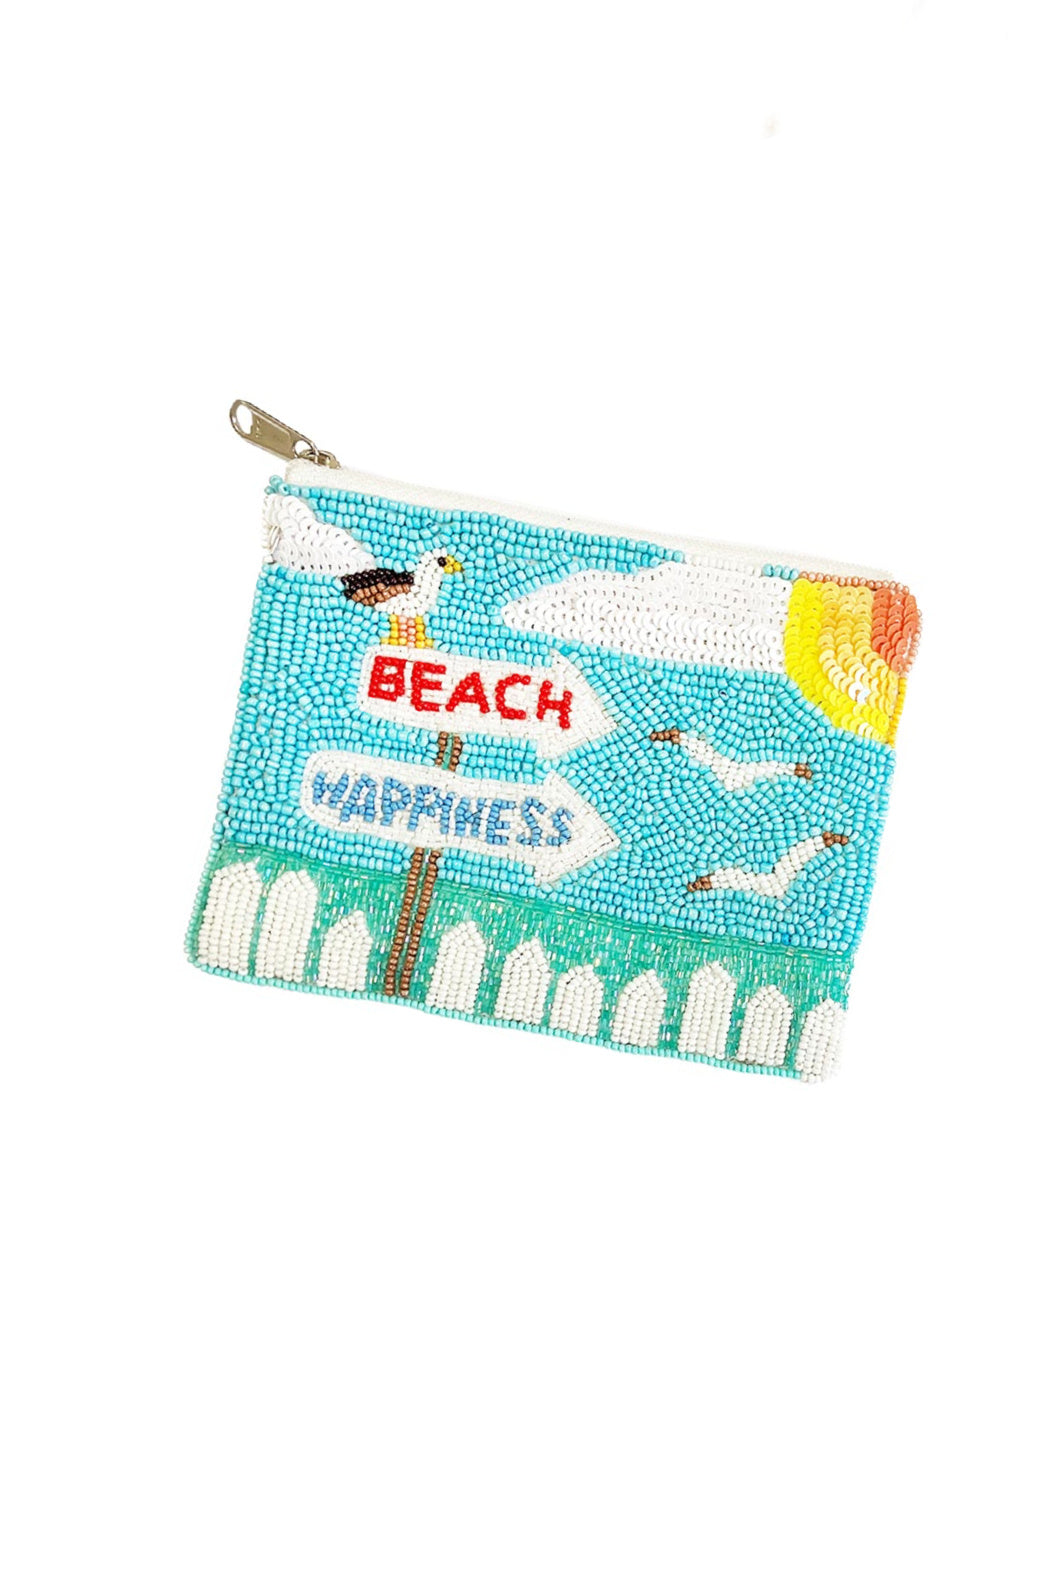 Beach Happiness Beaded Pouch